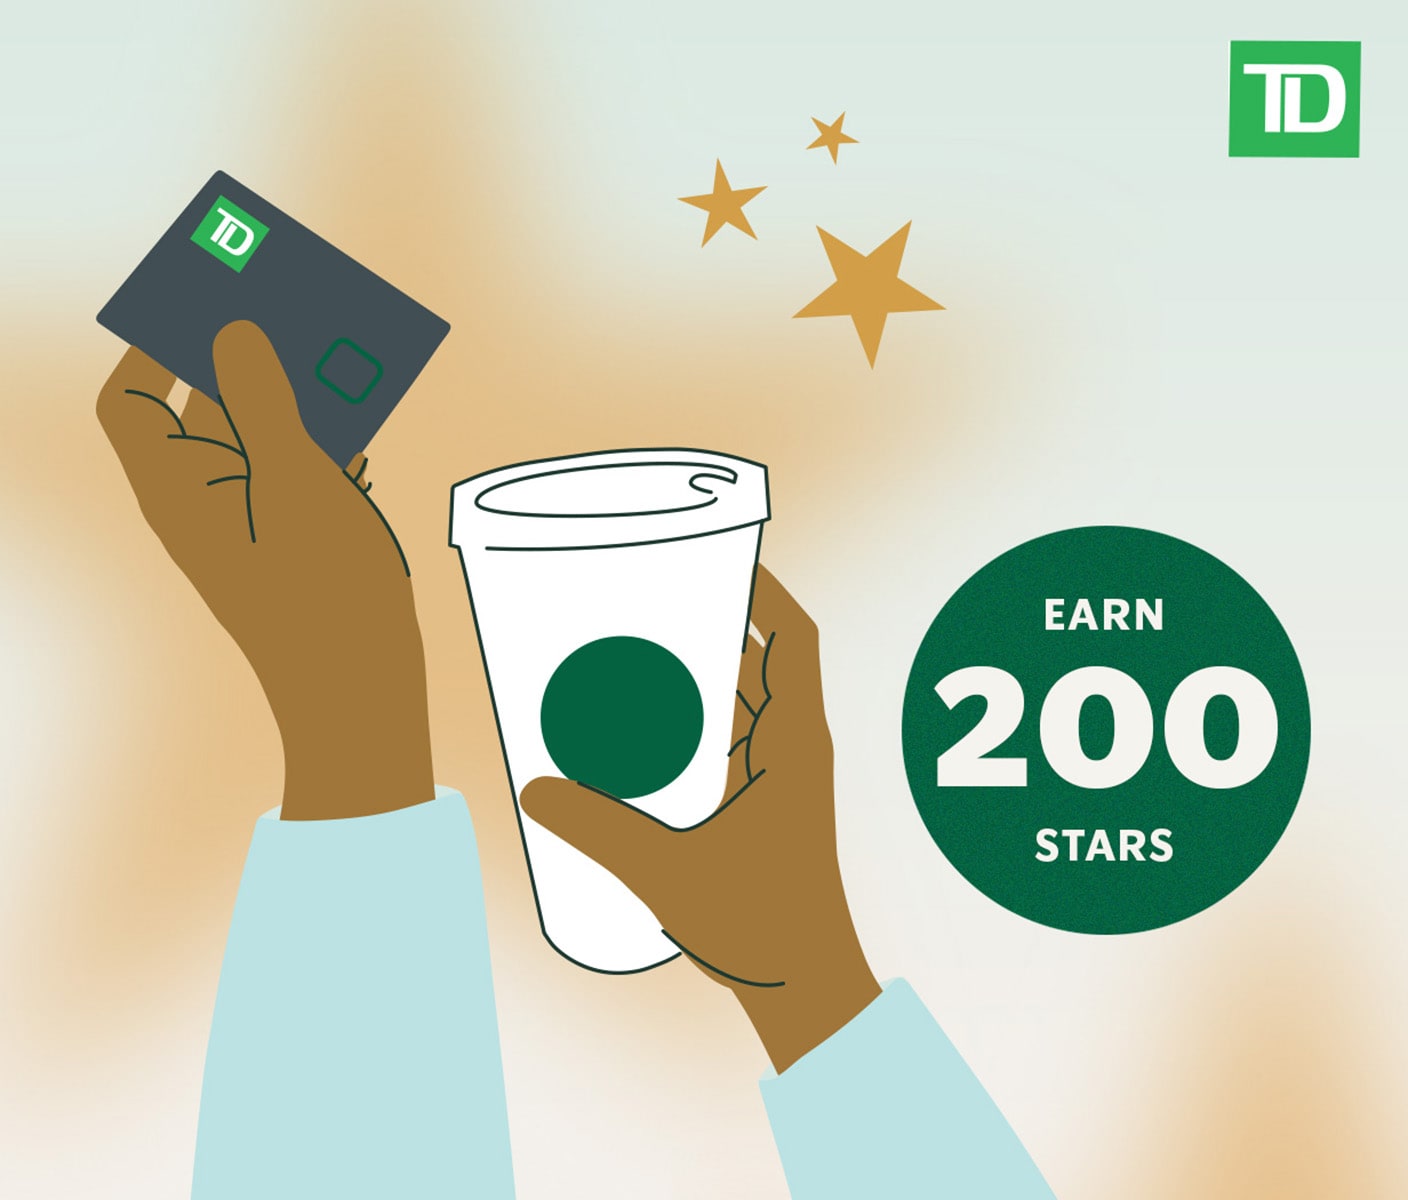 Hands holding a TD card and Starbucks cup surrounded by Stars with bubble stating earn 200 Stars.